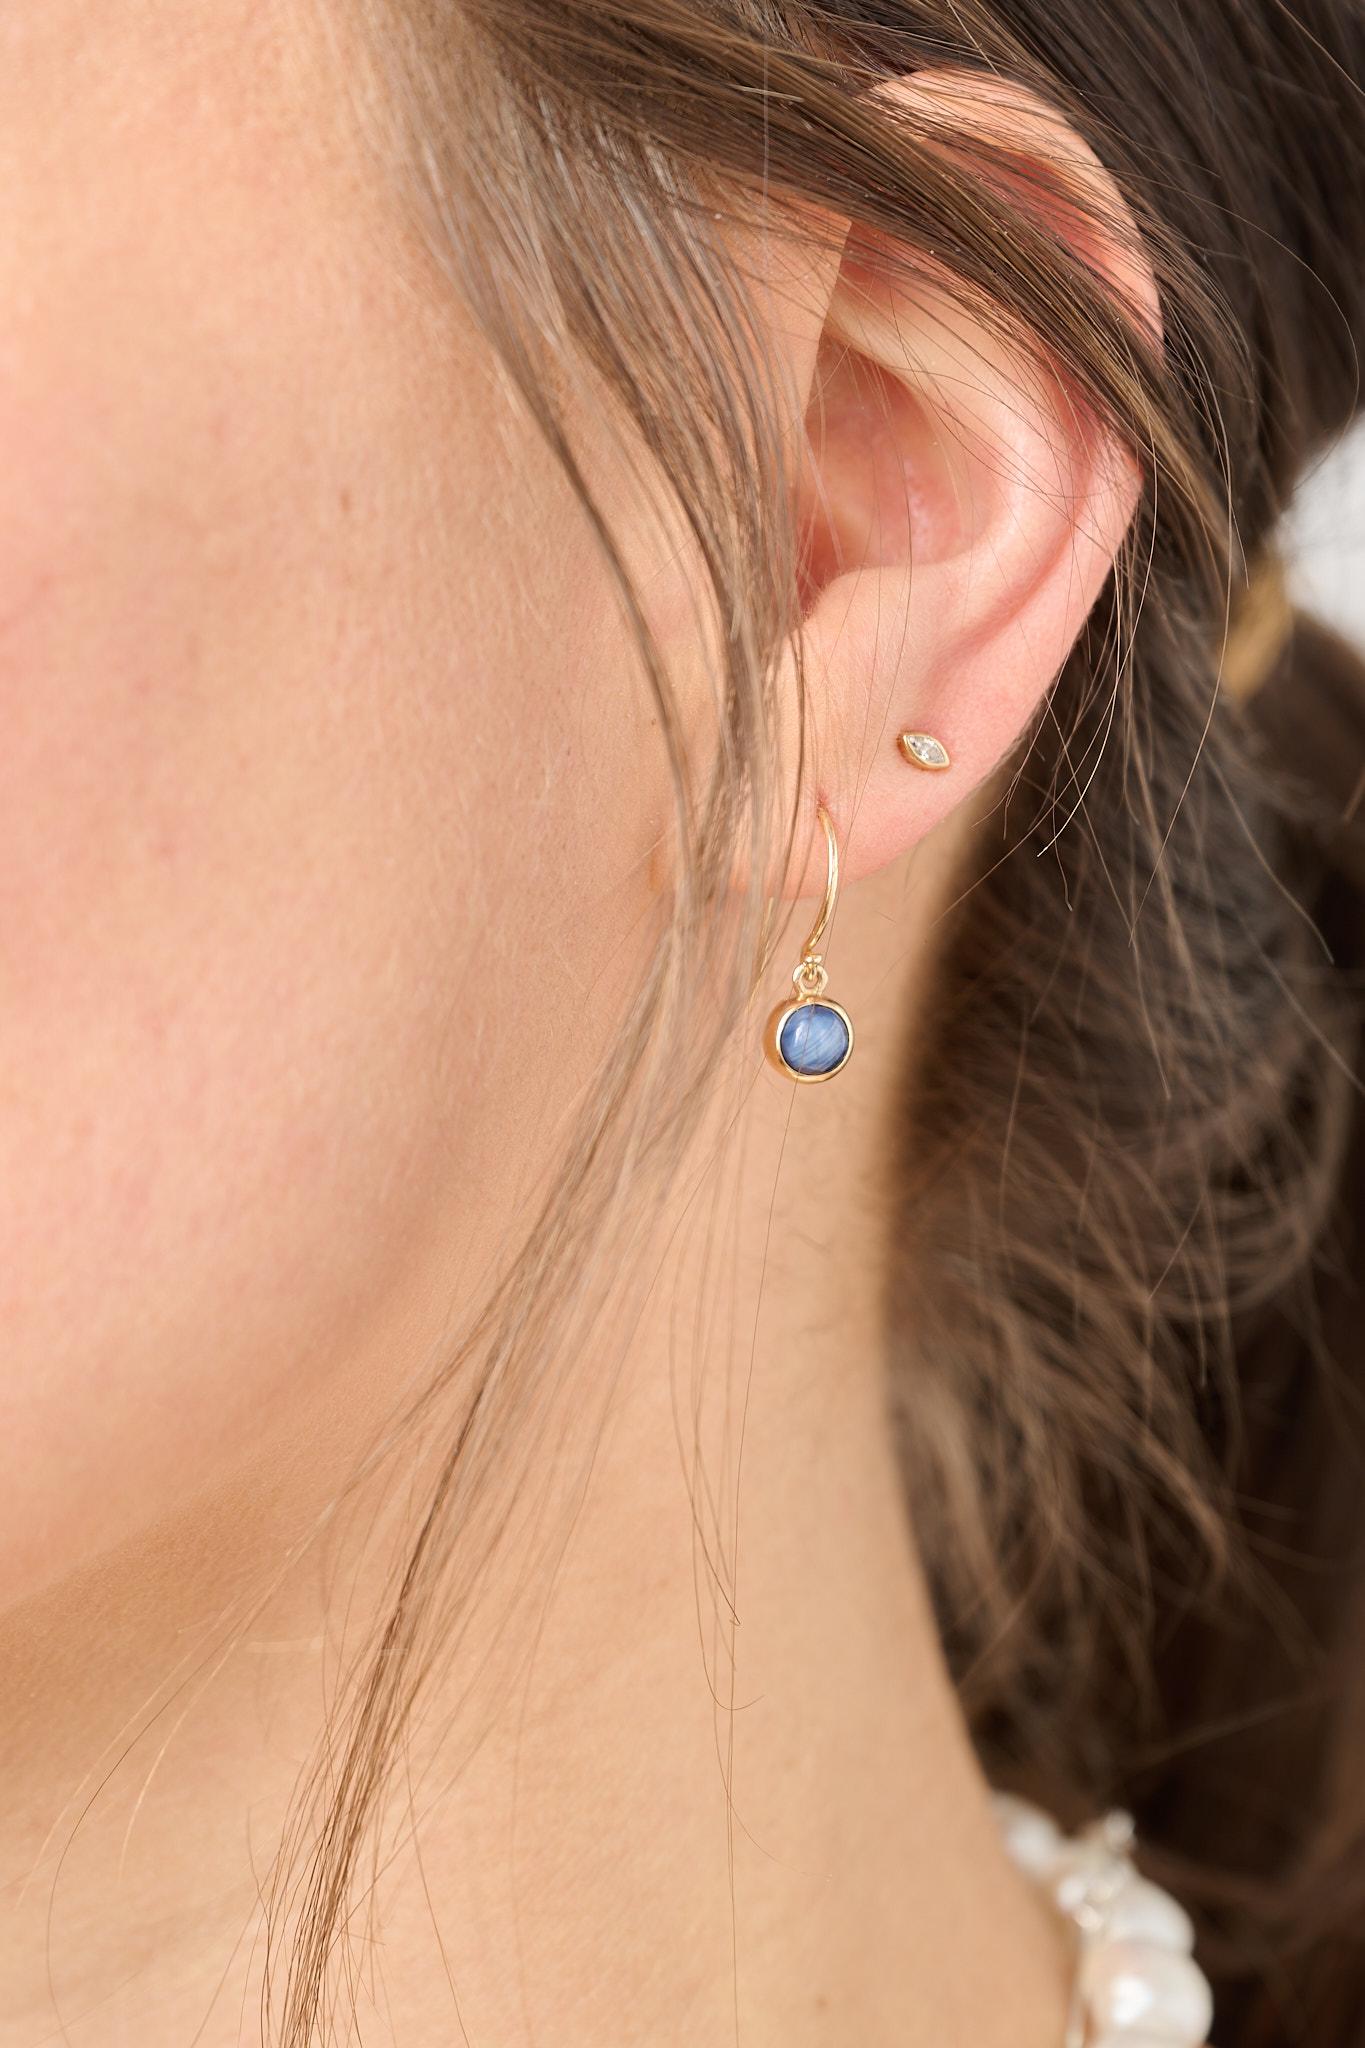 If you want something that goes with everything but will never go out of style, this is the earring for you. 4mm cabochon genuine sapphire stones dangle on a 14k yellow gold French ear wire. 

-14k yellow gold
-2, 4mm cabochon genuine sapphire